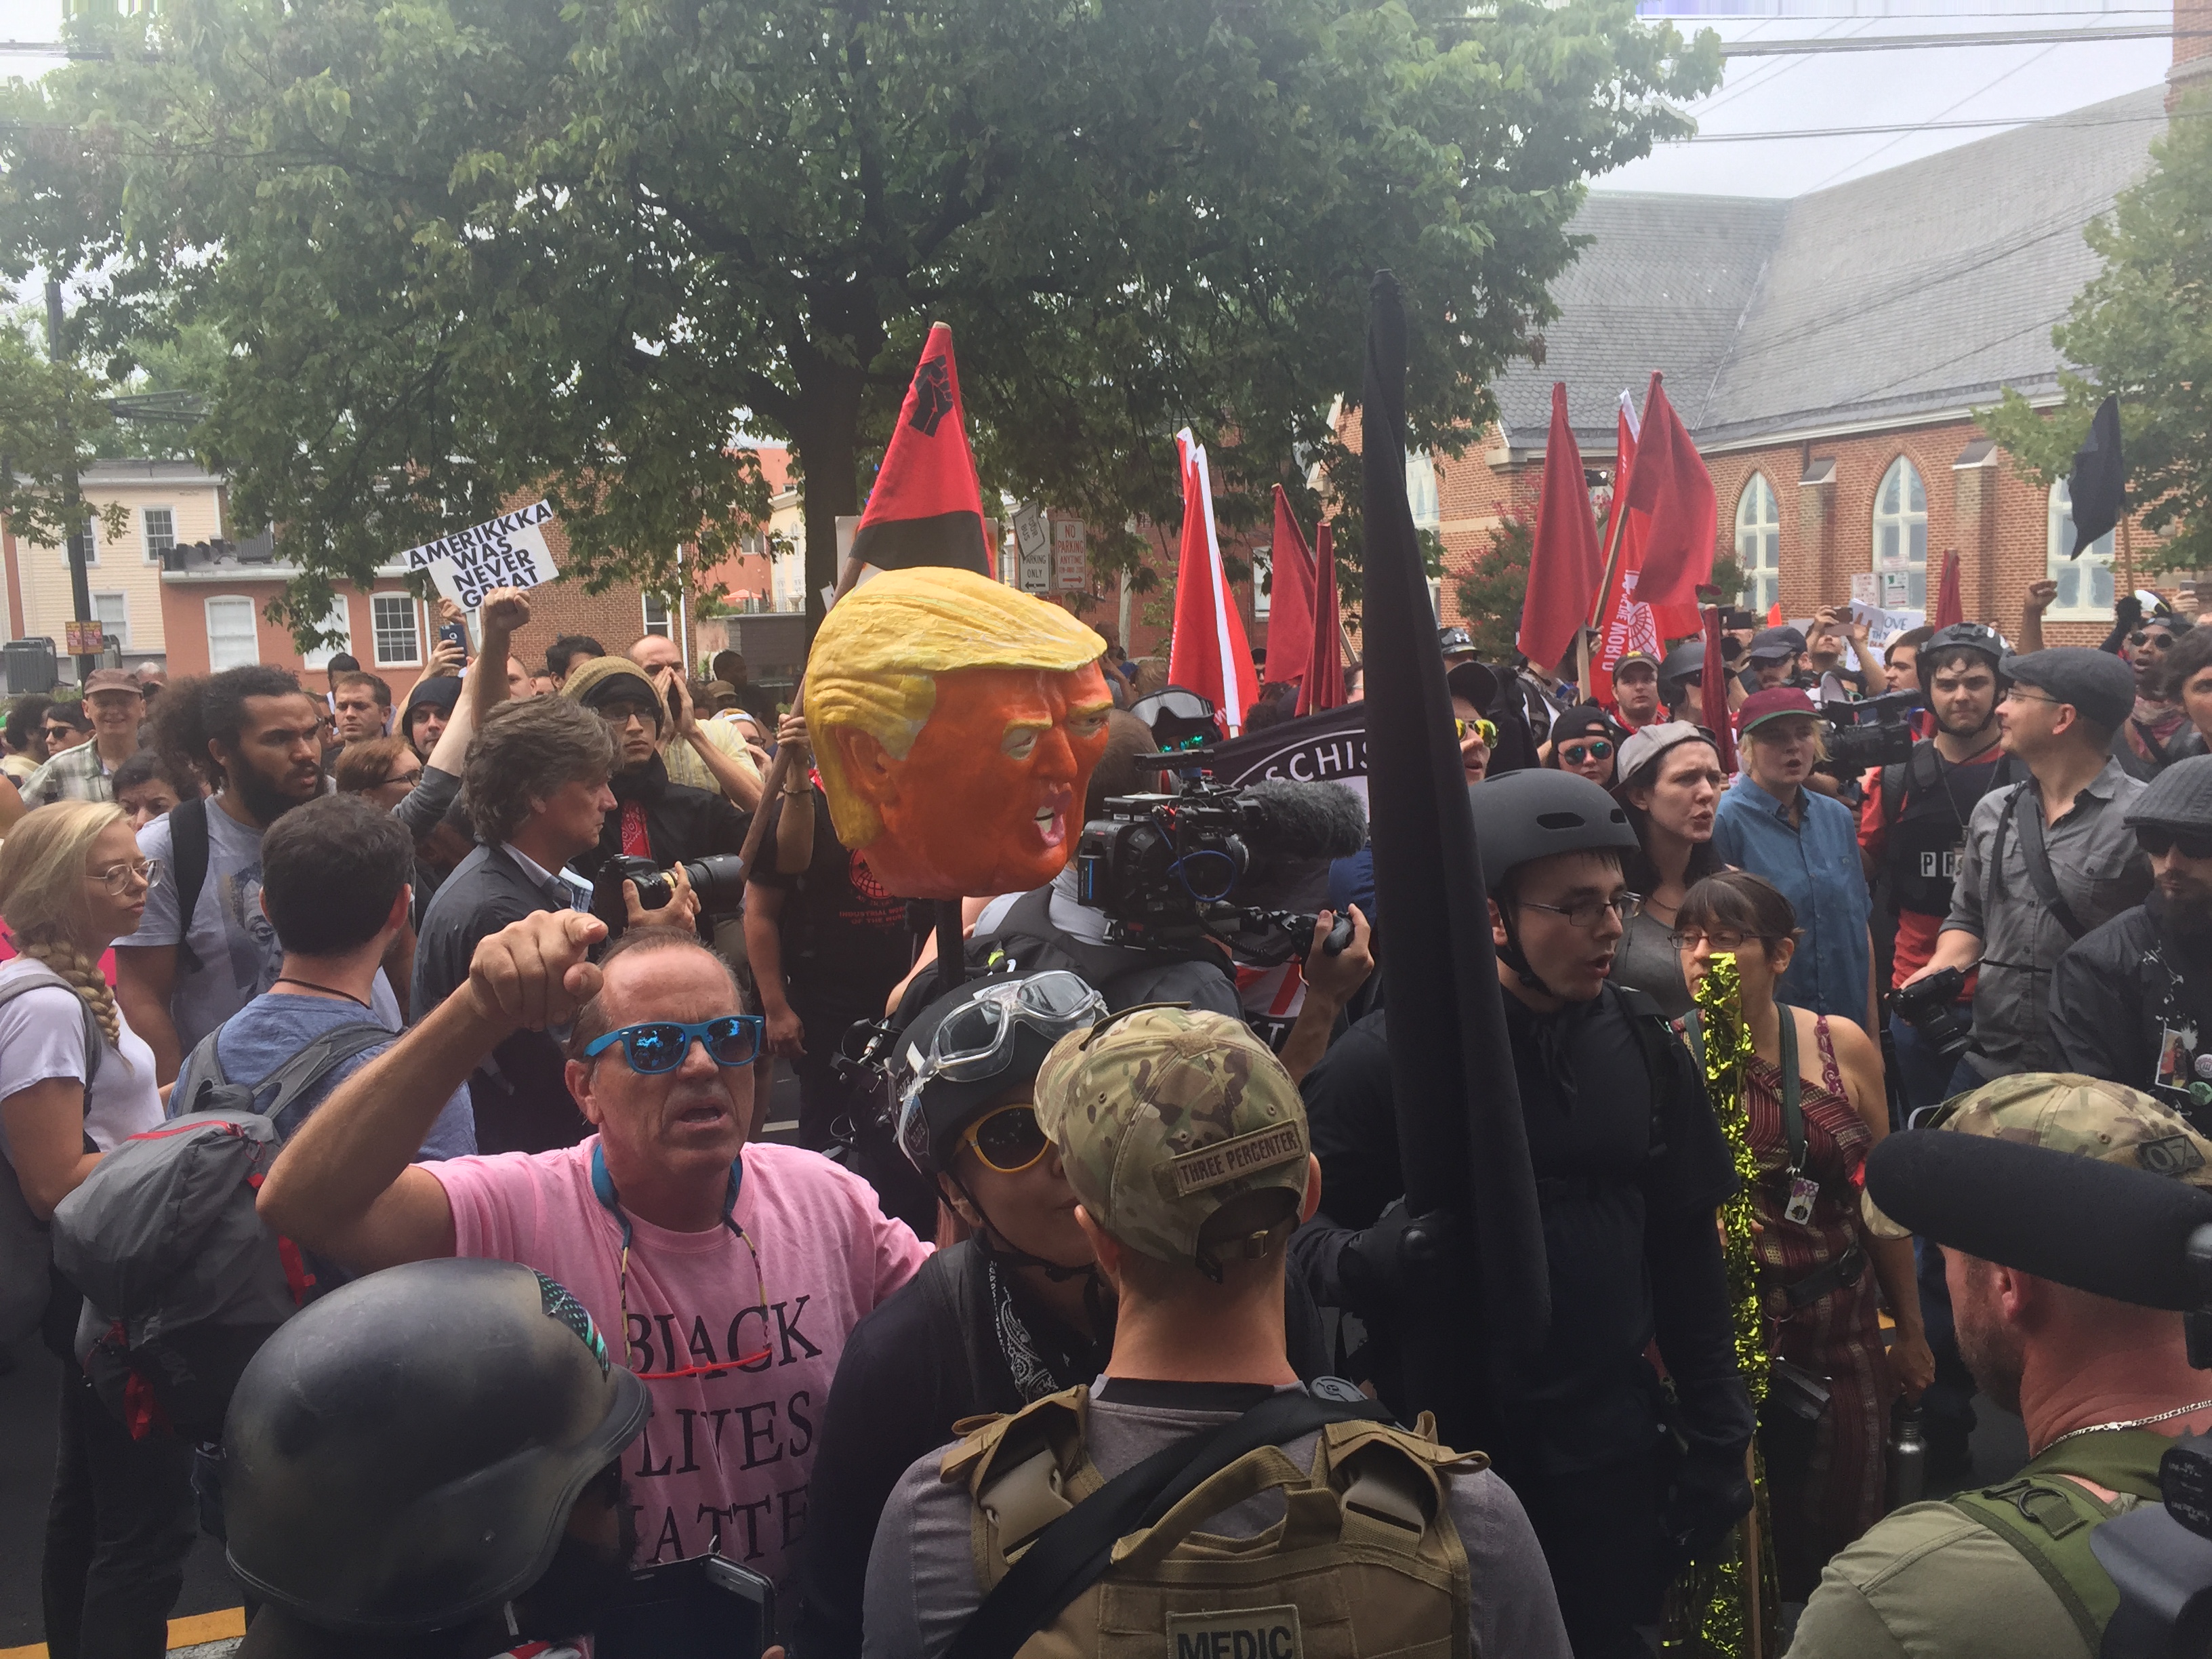 Counter-protesters in Charlottesville Saturday (Henry Rodgers, TheDCNF)